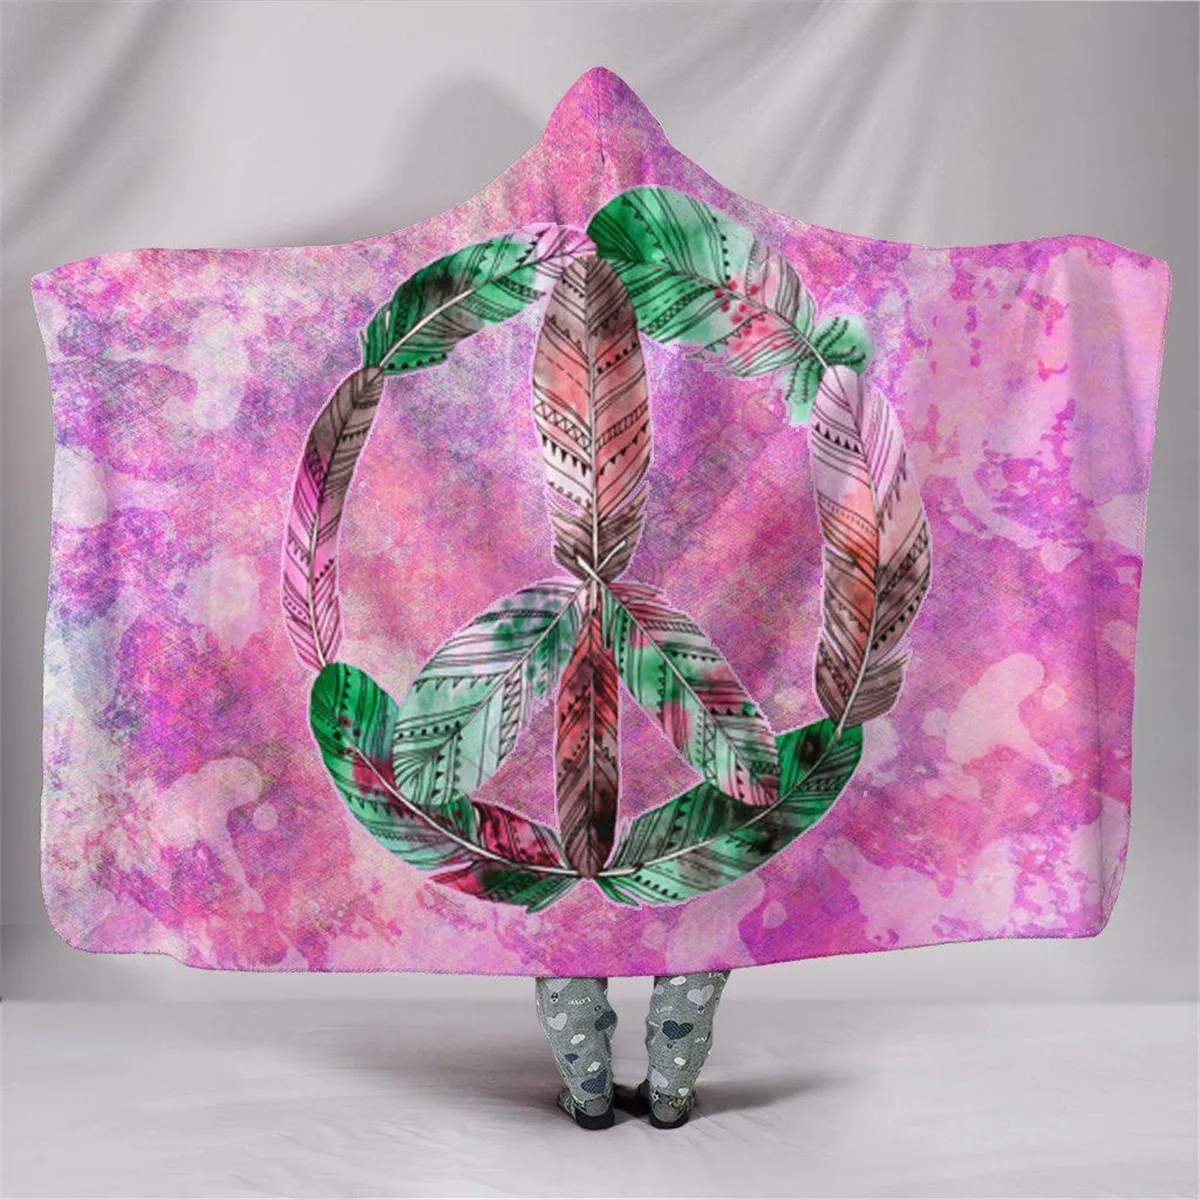 

Boho Peace Feathers 3d printed Hooded Blanket Adult colorful child Sherpa Fleece Wearable Blanket Microfiber Bedding